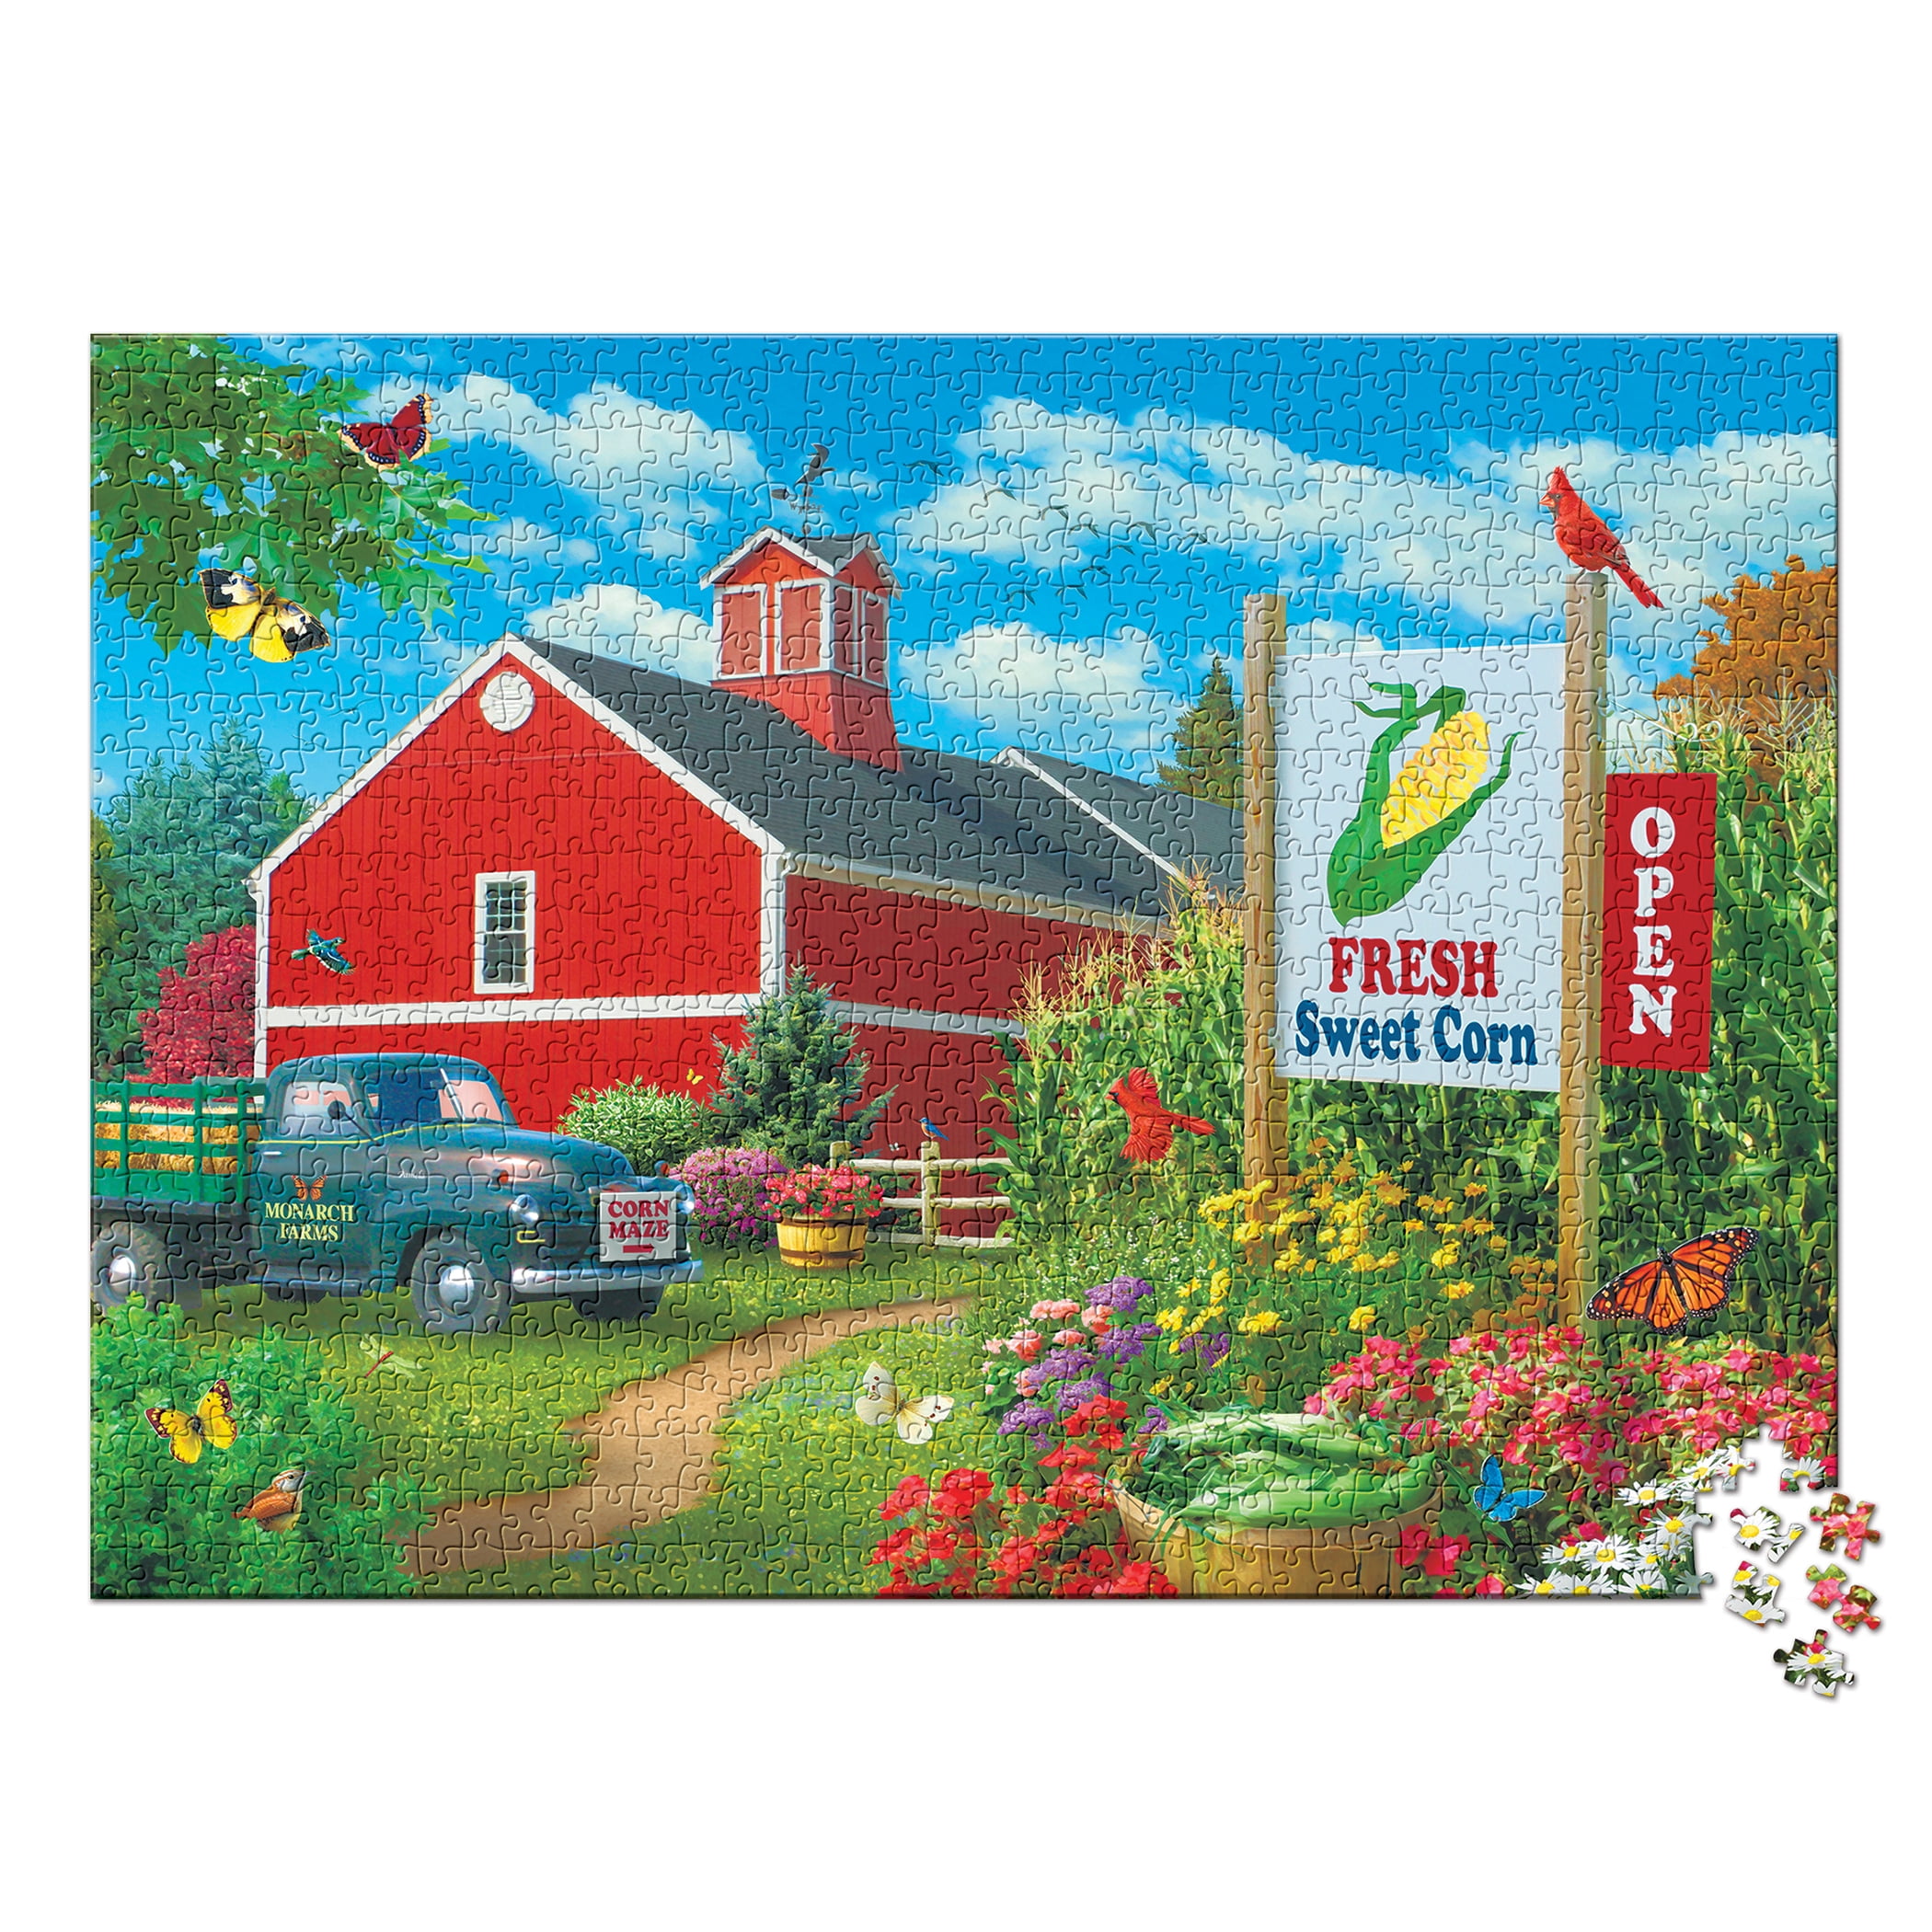 Otter House 1000 Piece Landscape Jigsaw Puzzle Country Life